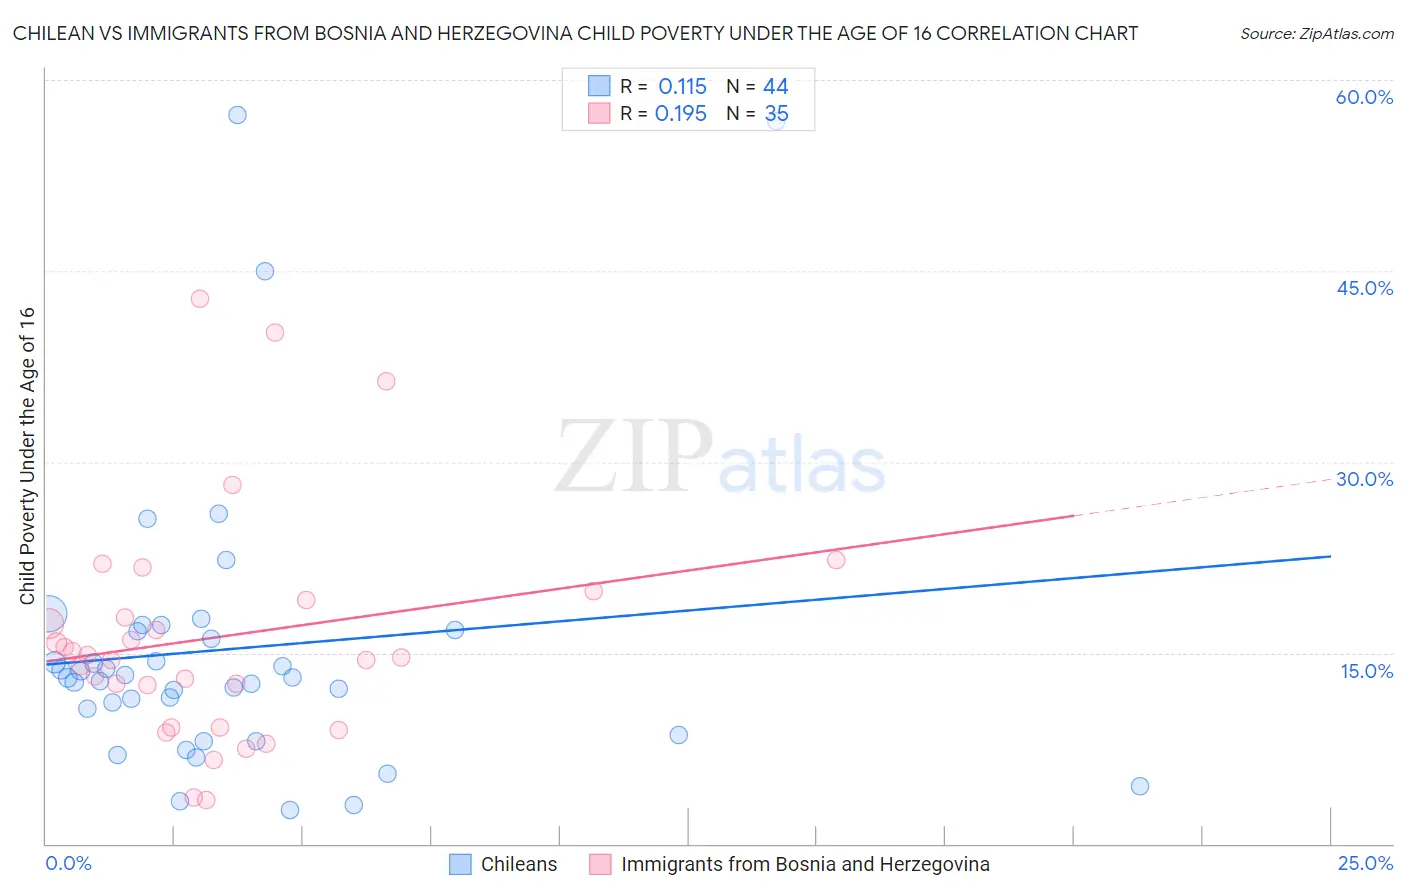 Chilean vs Immigrants from Bosnia and Herzegovina Child Poverty Under the Age of 16